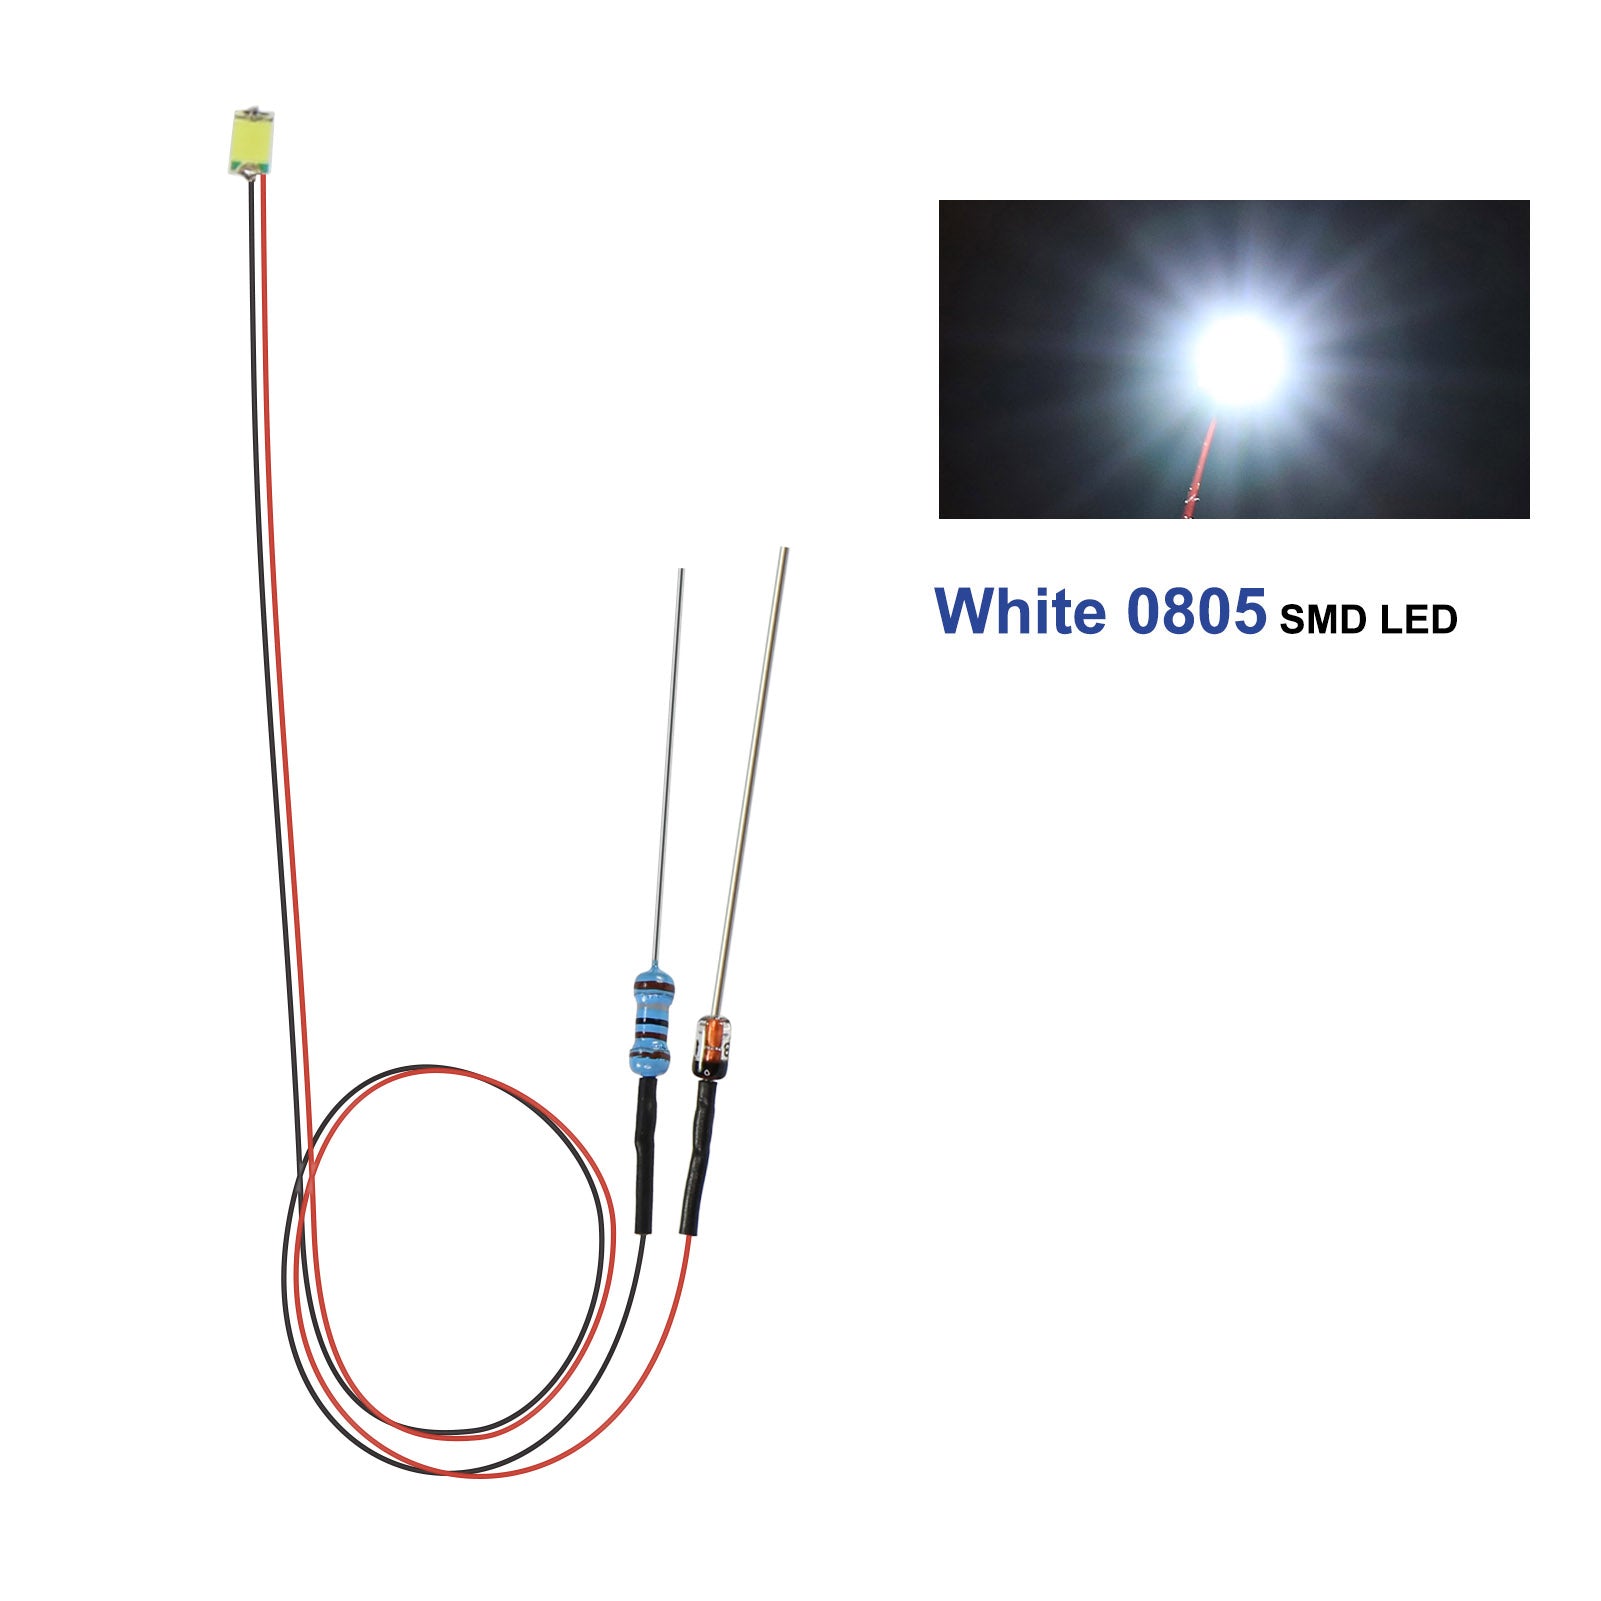 LR0805 20pcs Pre-wired 50cm Wire 0805 SMD LED Lights with Resistor Rectifier